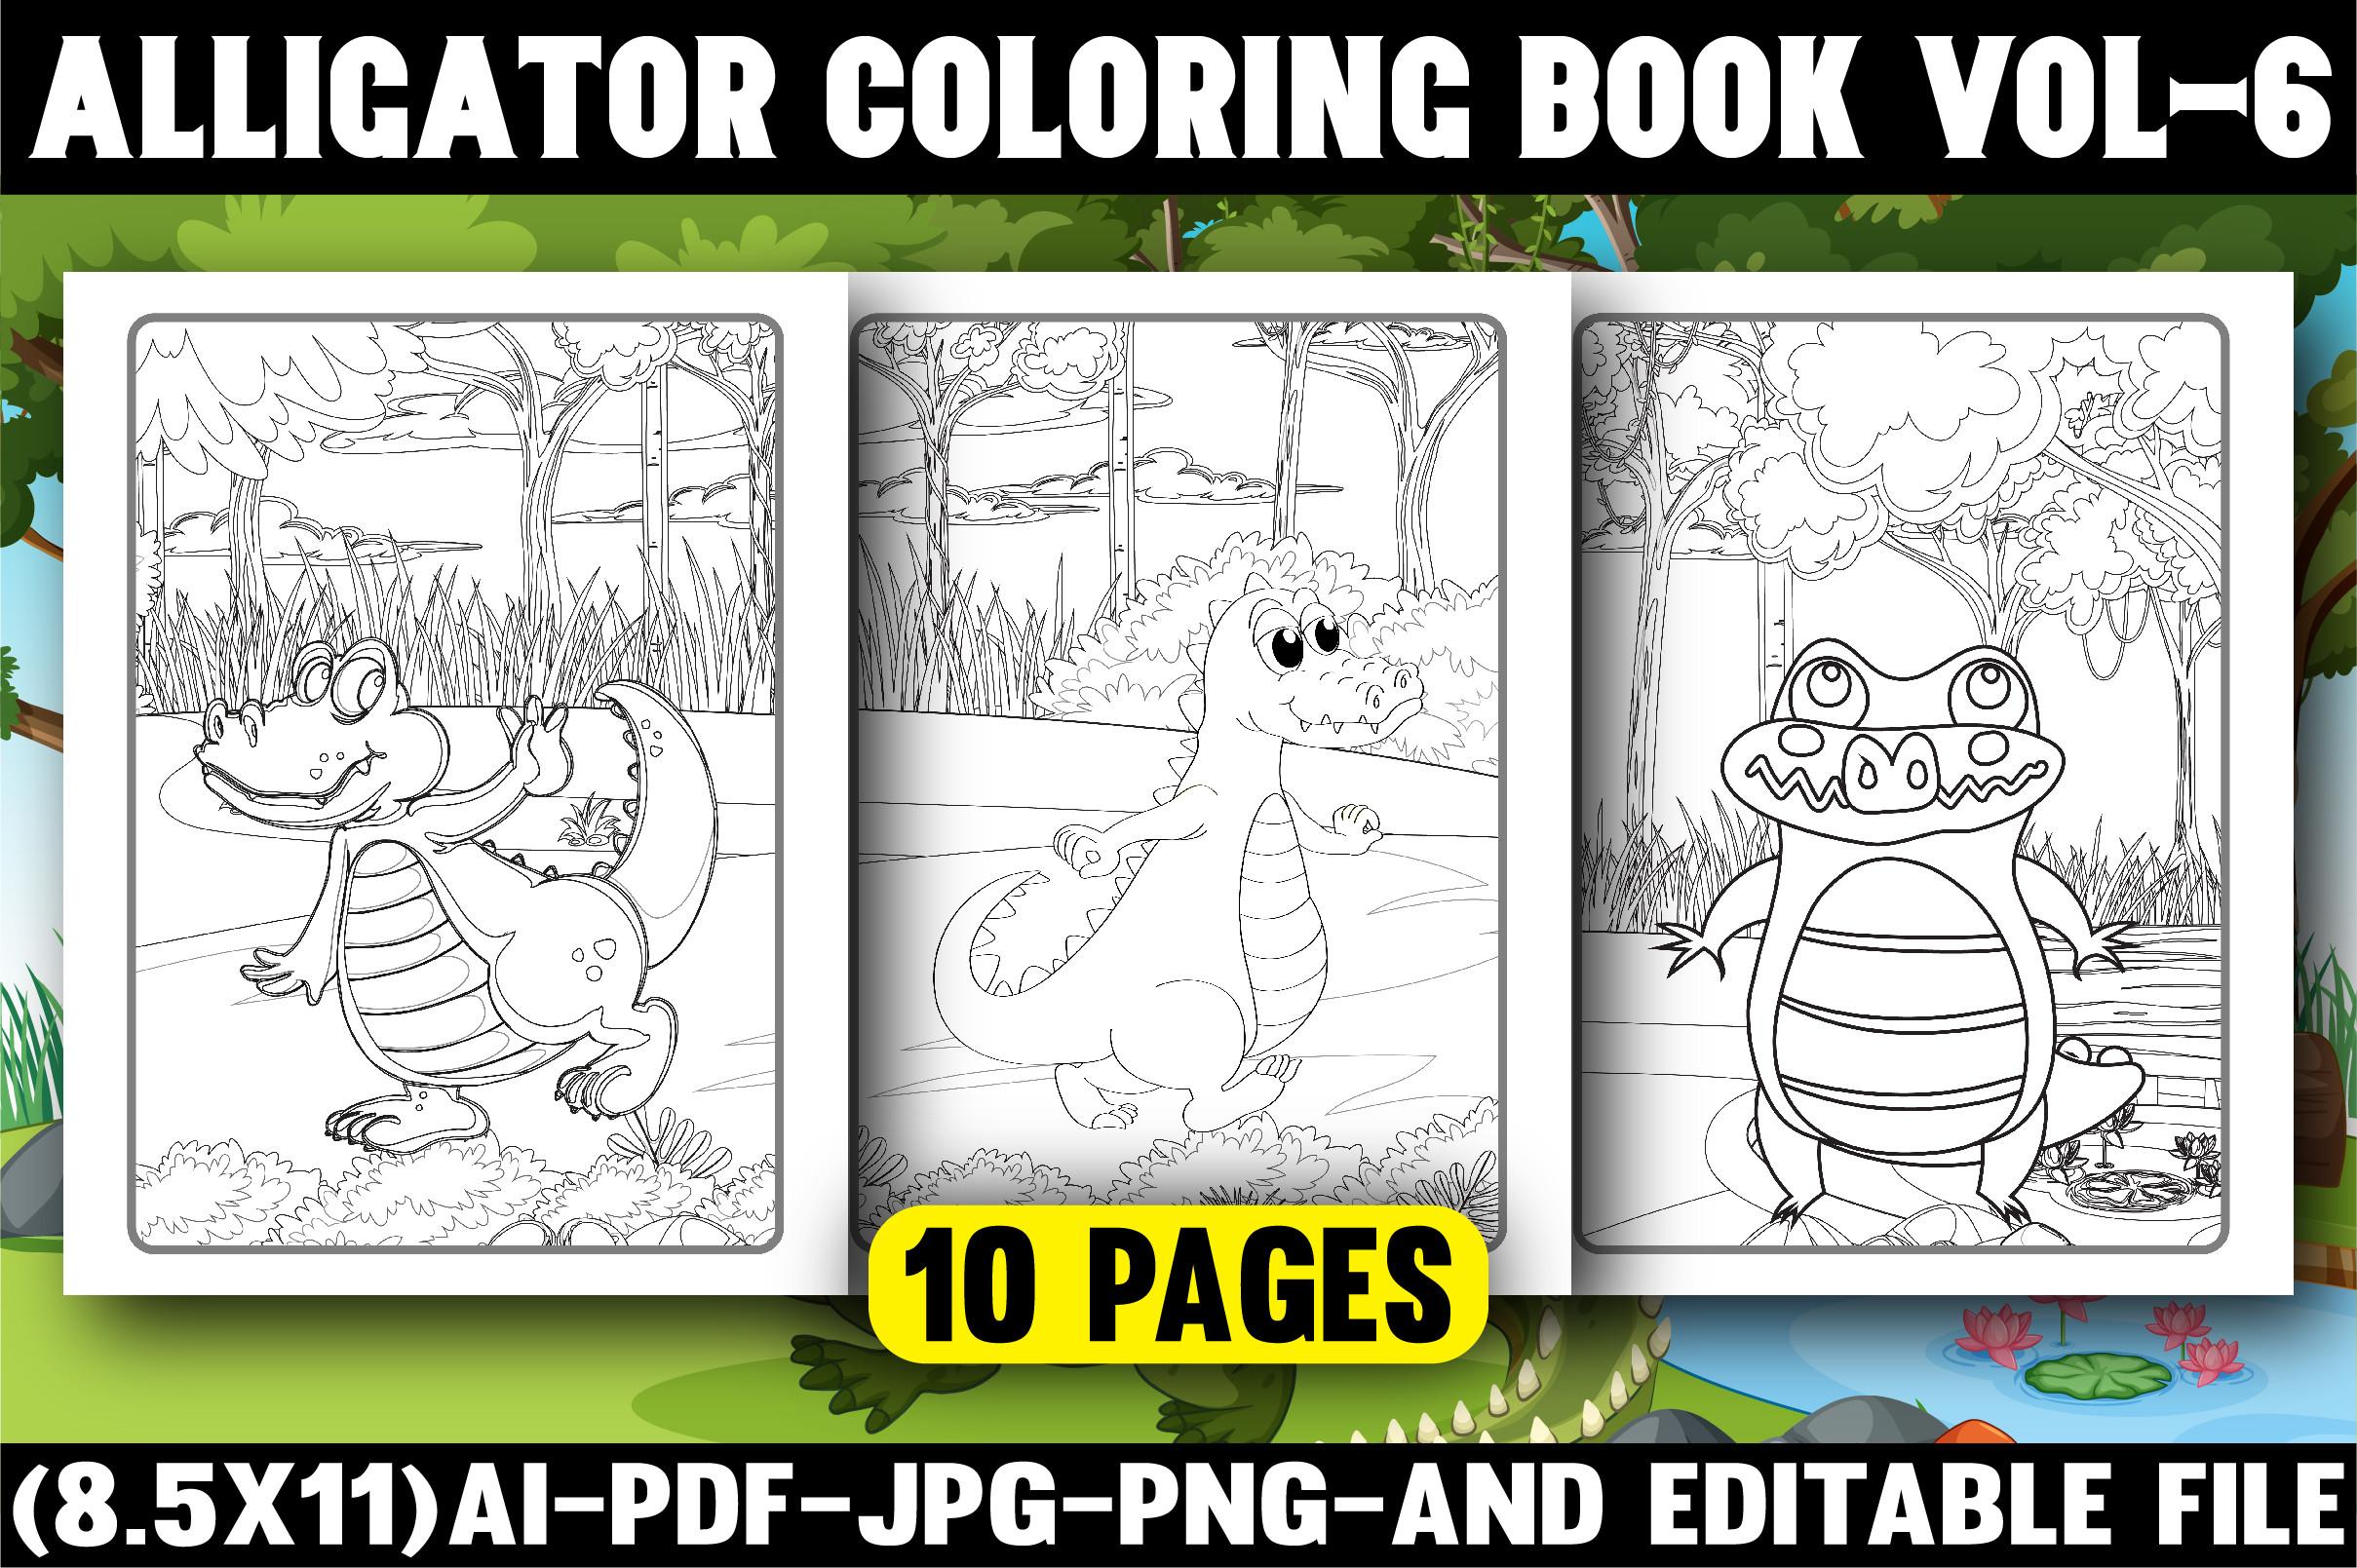 Alligator Coloring Pages for Kids VoL-6